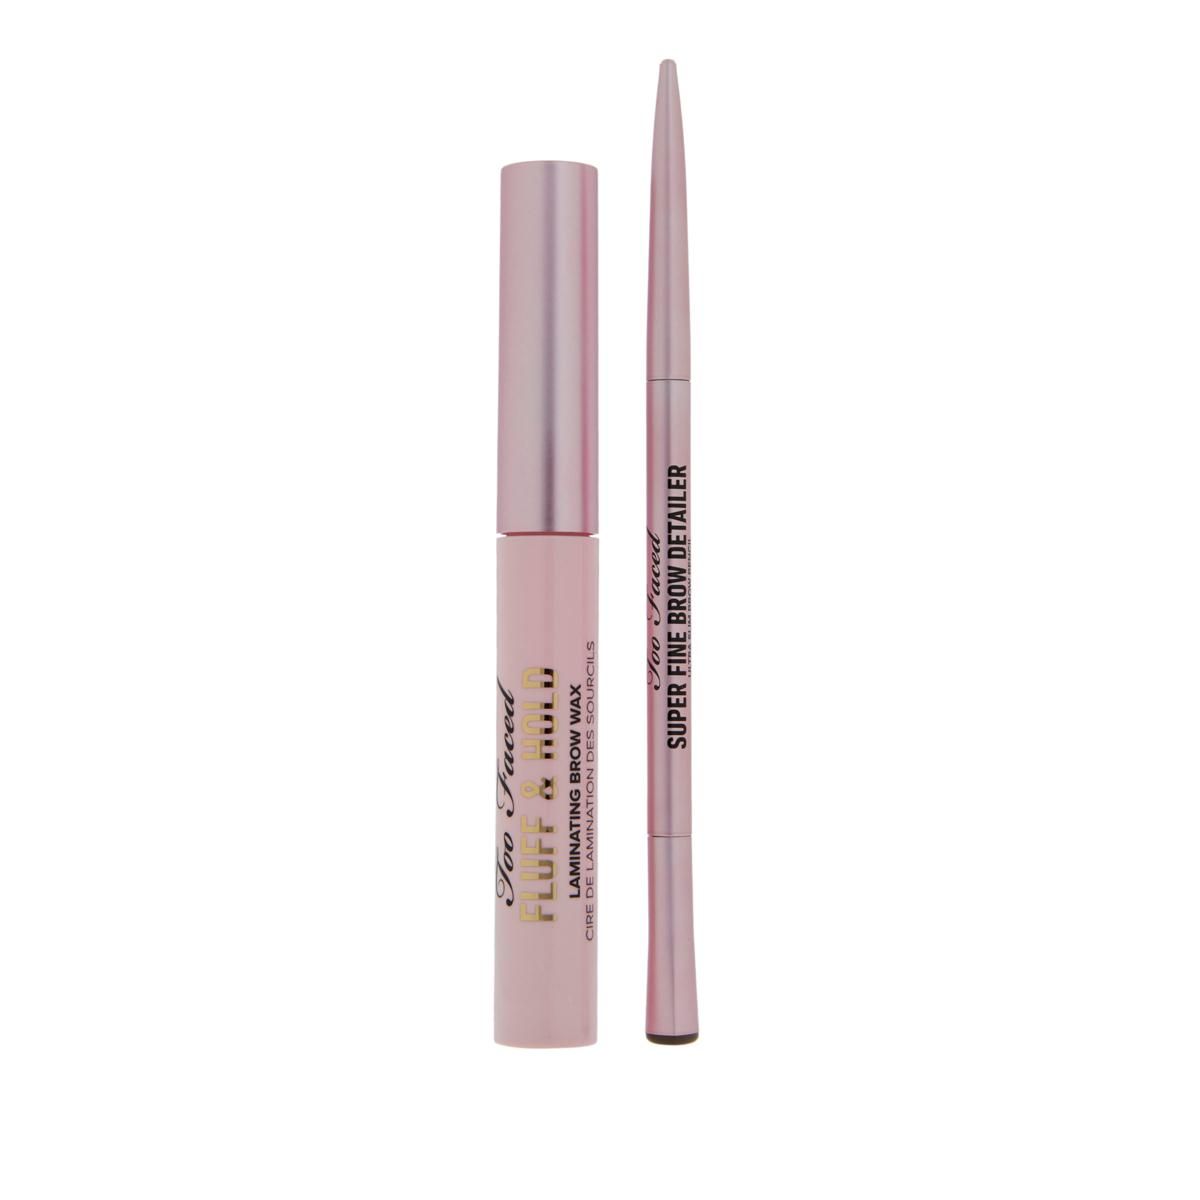 Too Faced Super Fine Brow Detailer and Fluff & Hold Brow Wax - 20393953 | HSN | HSN